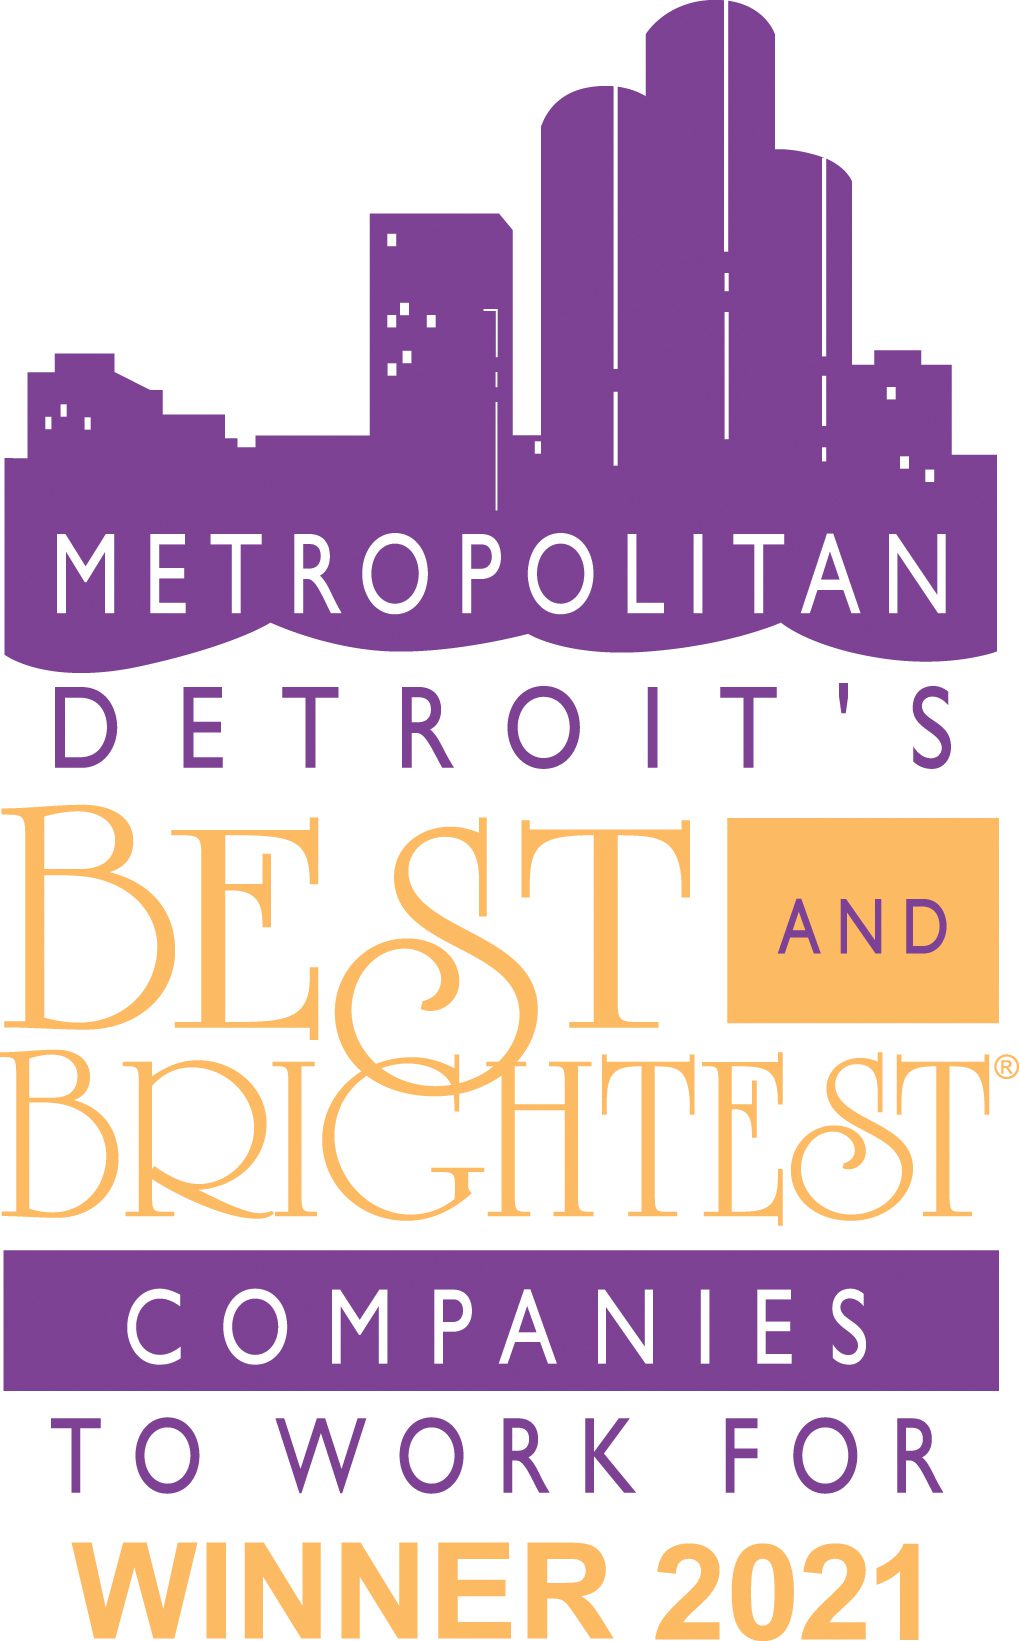 Detroit Best Companies to Work For